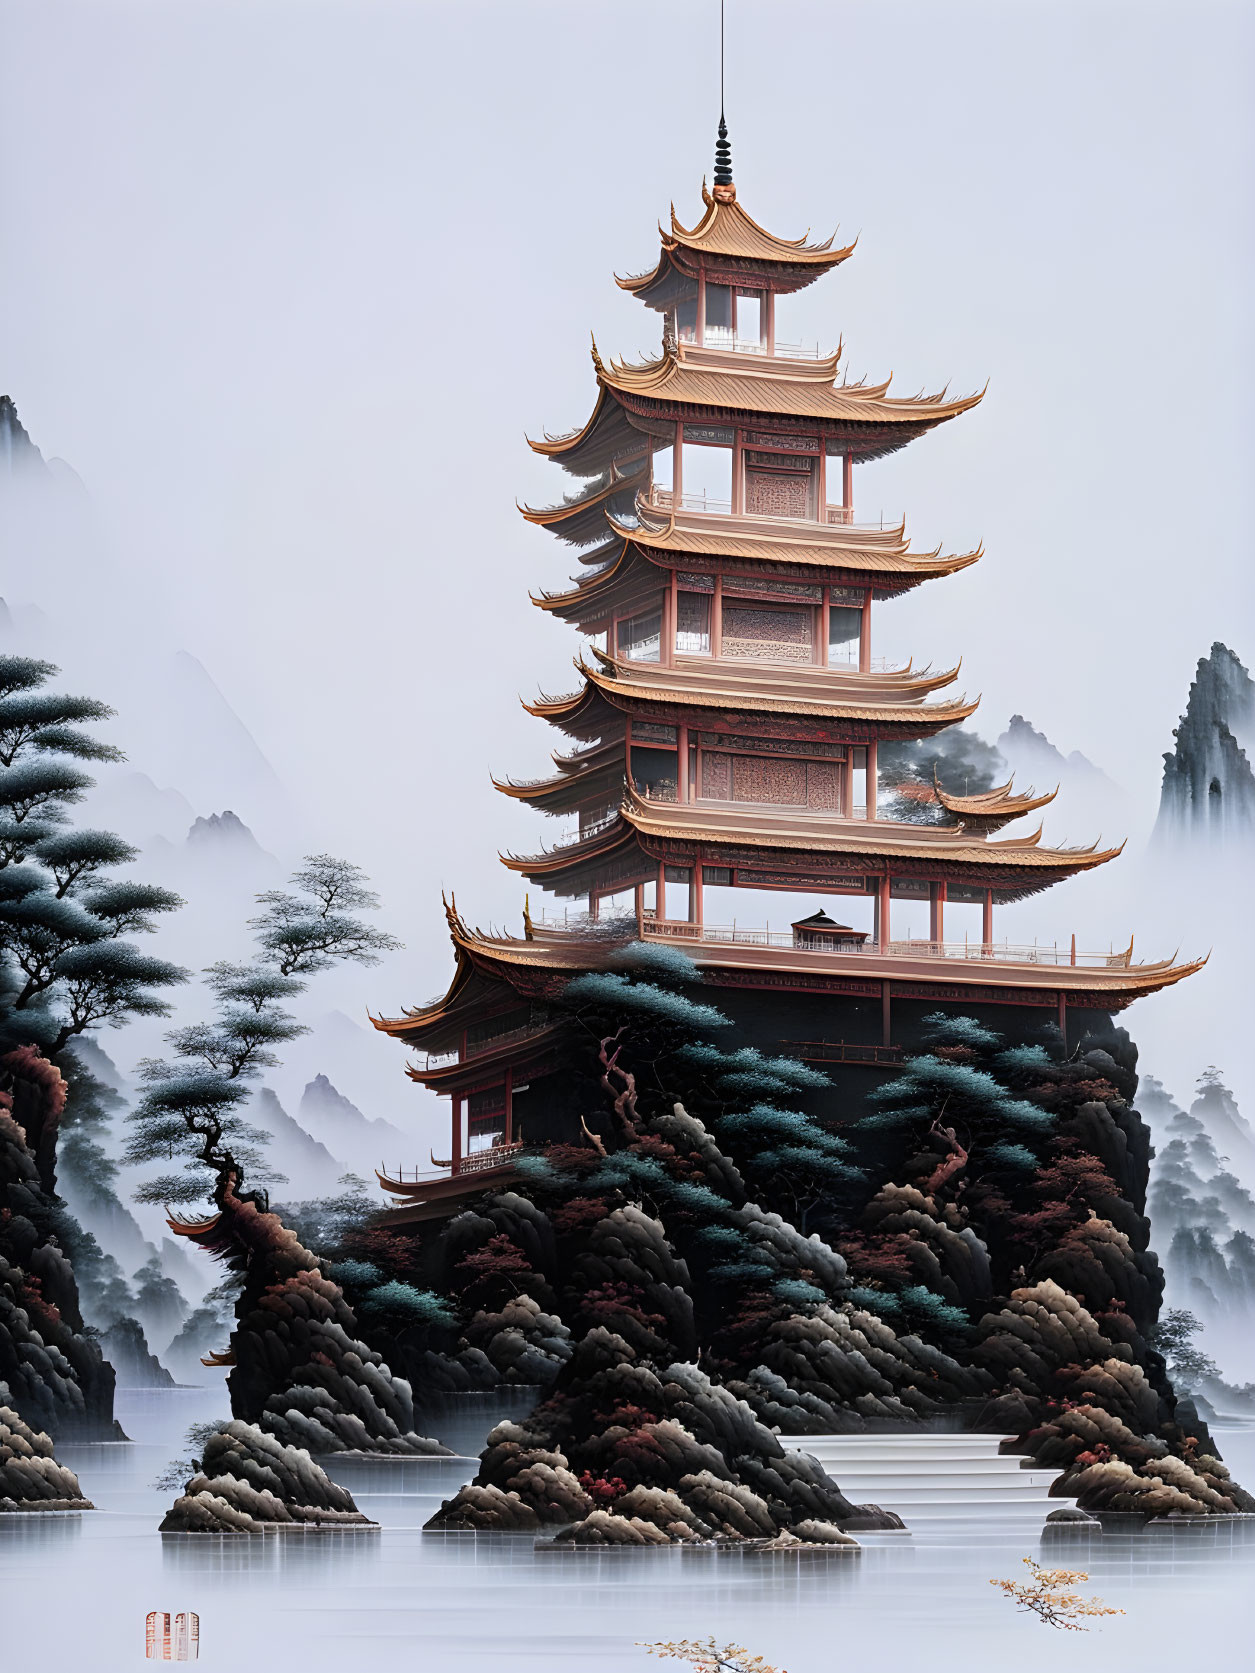 Misty Waters: Multi-Tiered Pagoda, Pine Trees & Mountains